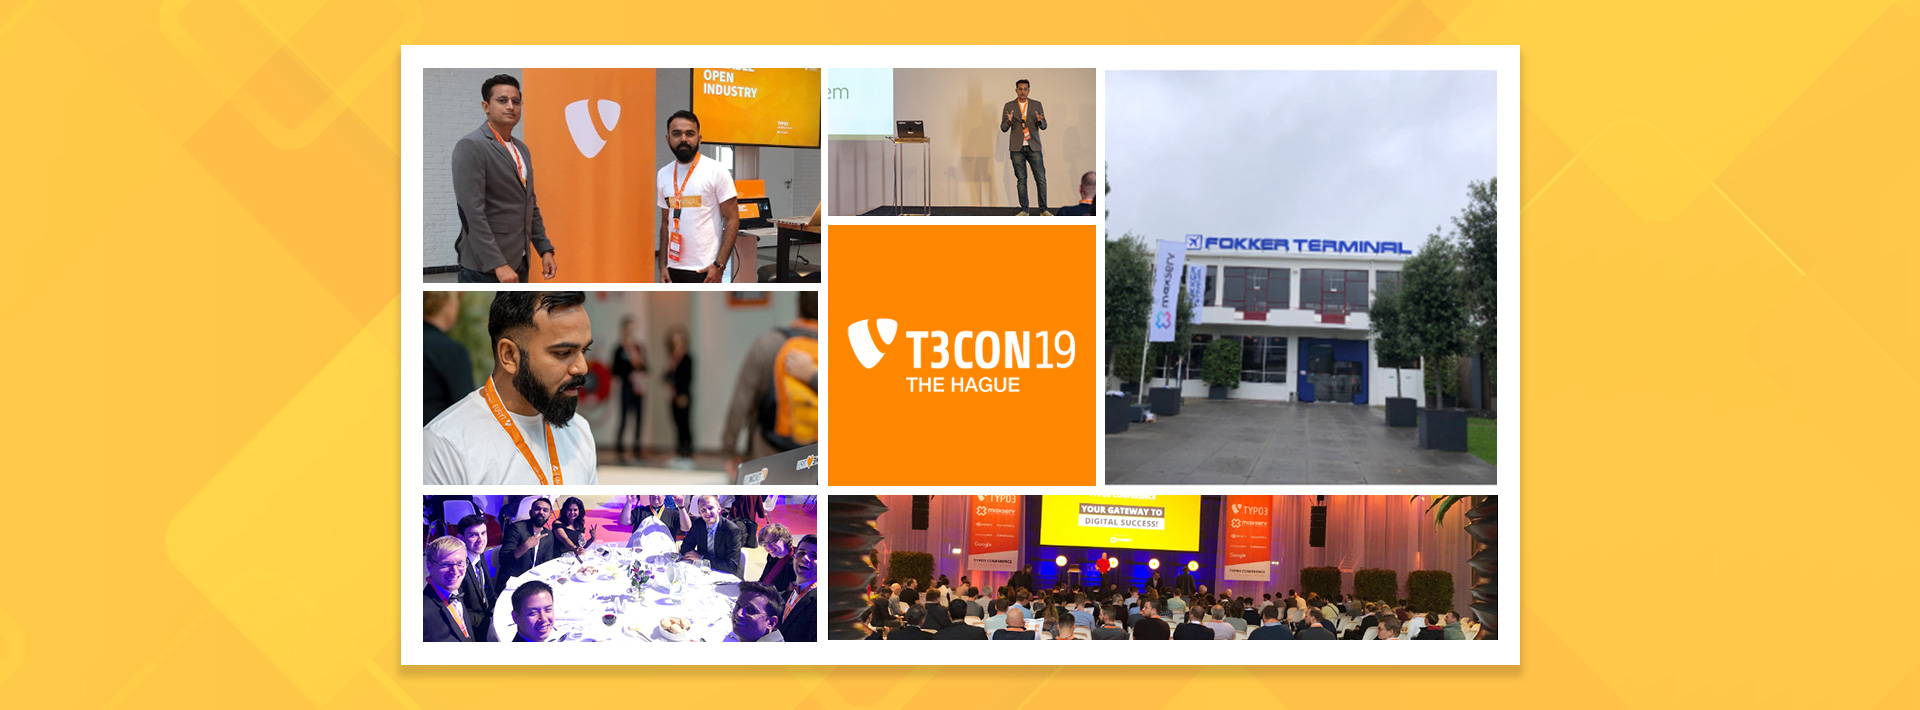 TYPO3 Conference 2019,Netherlands